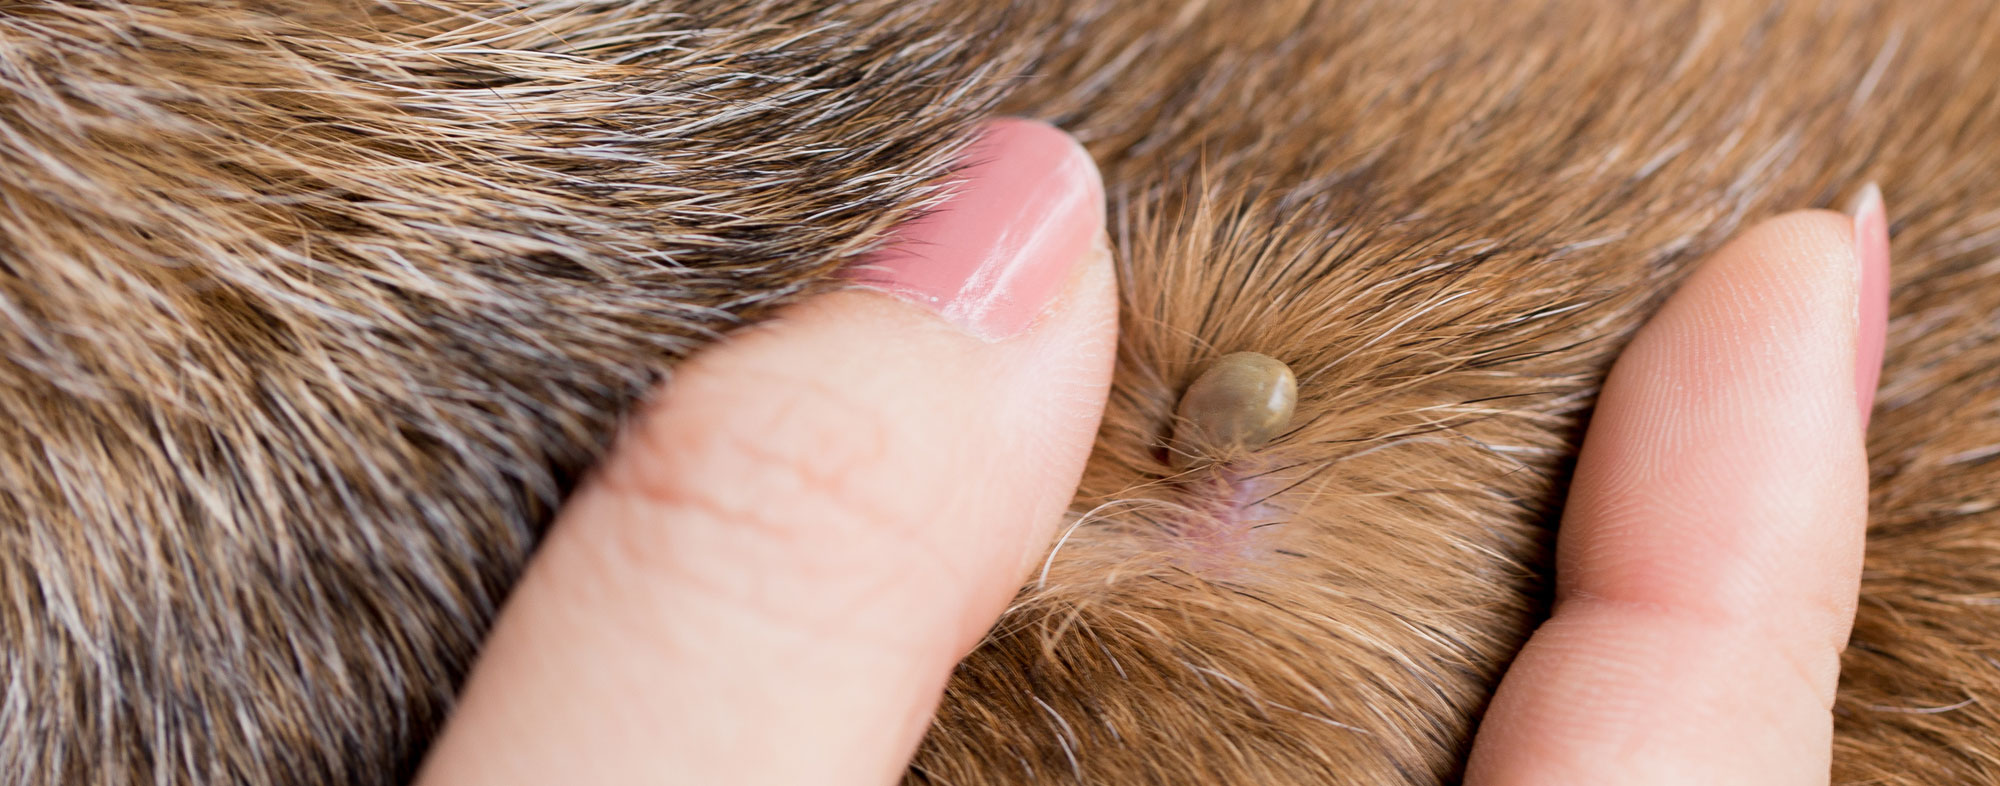 Tick embedded in dog fur. Learn what to do when treating lyme disease in dogs.